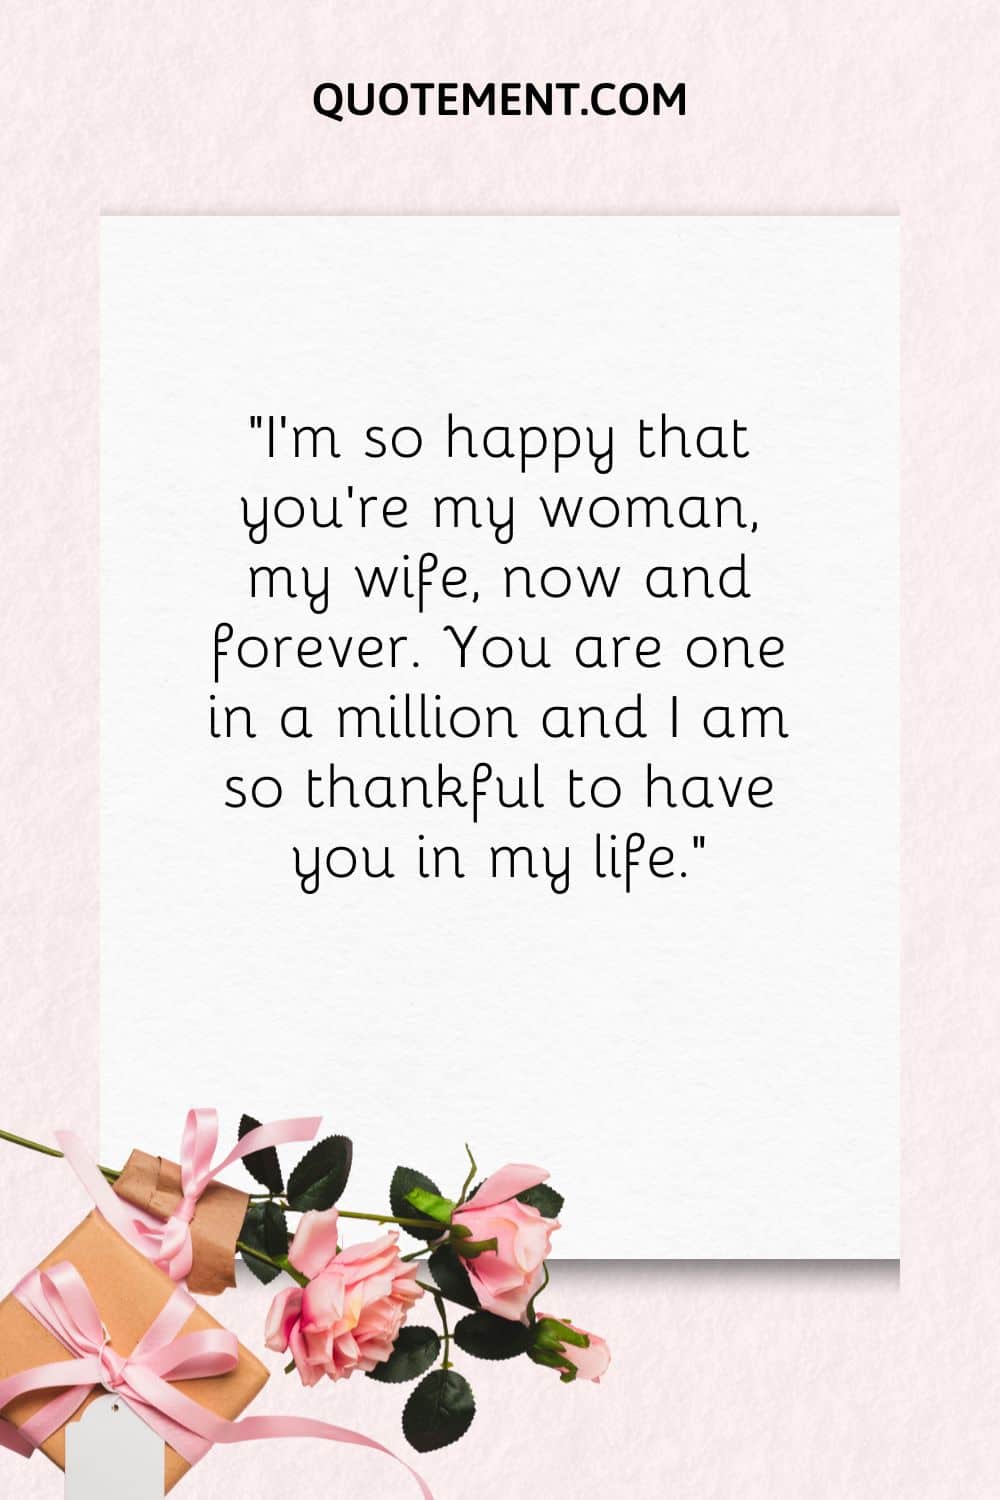 “I’m so happy that you’re my woman, my wife, now and forever. You are one in a million and I am so thankful to have you in my life.”